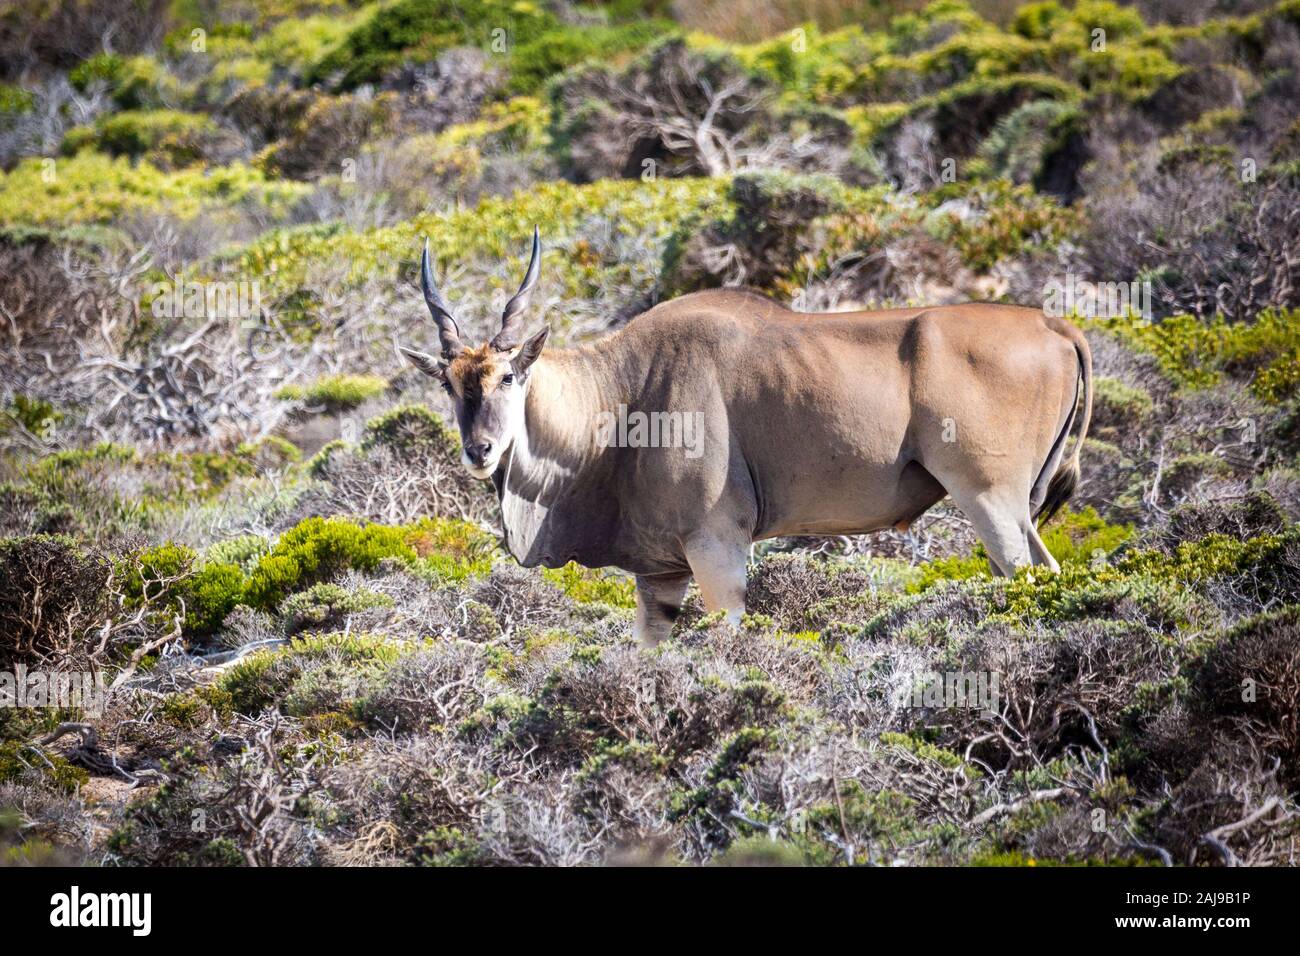 Close up of an Eland antelope (Taurotragus oryx) foraging in fynbos vegetation, South Africa Stock Photo